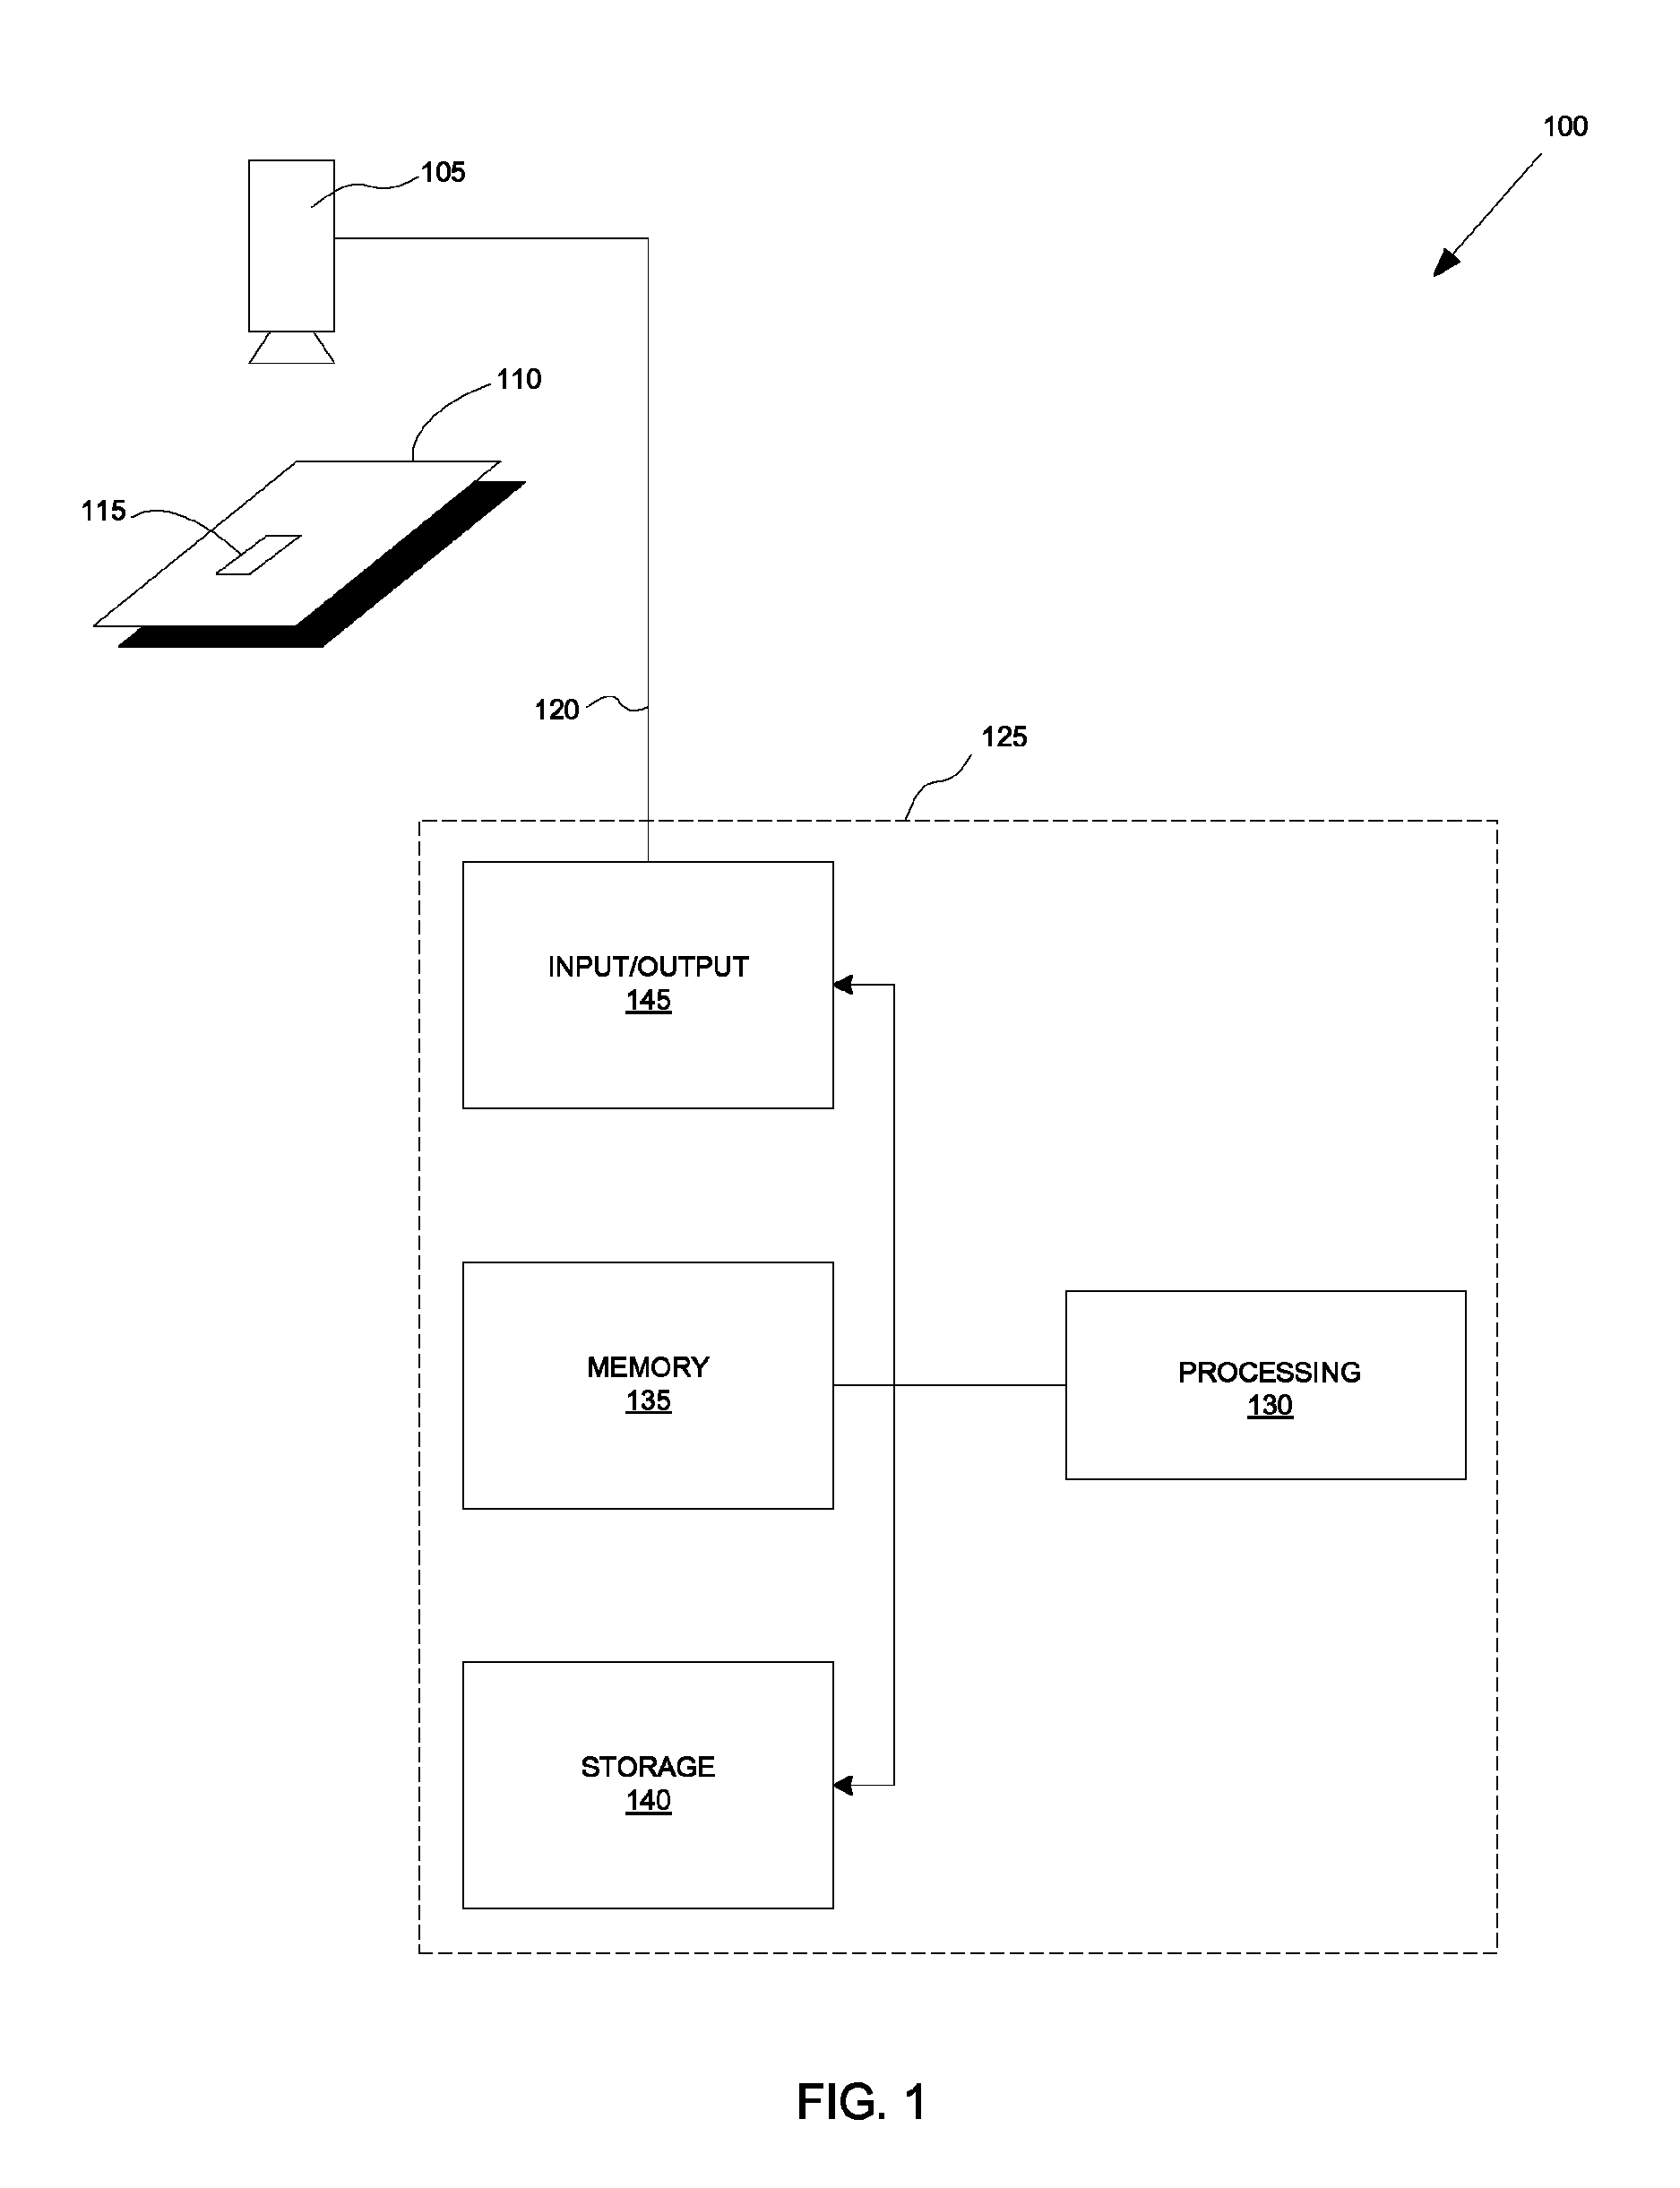 System and method for identifying and locating instances of a shape under large variations in linear degrees of freedom and/or stroke widths